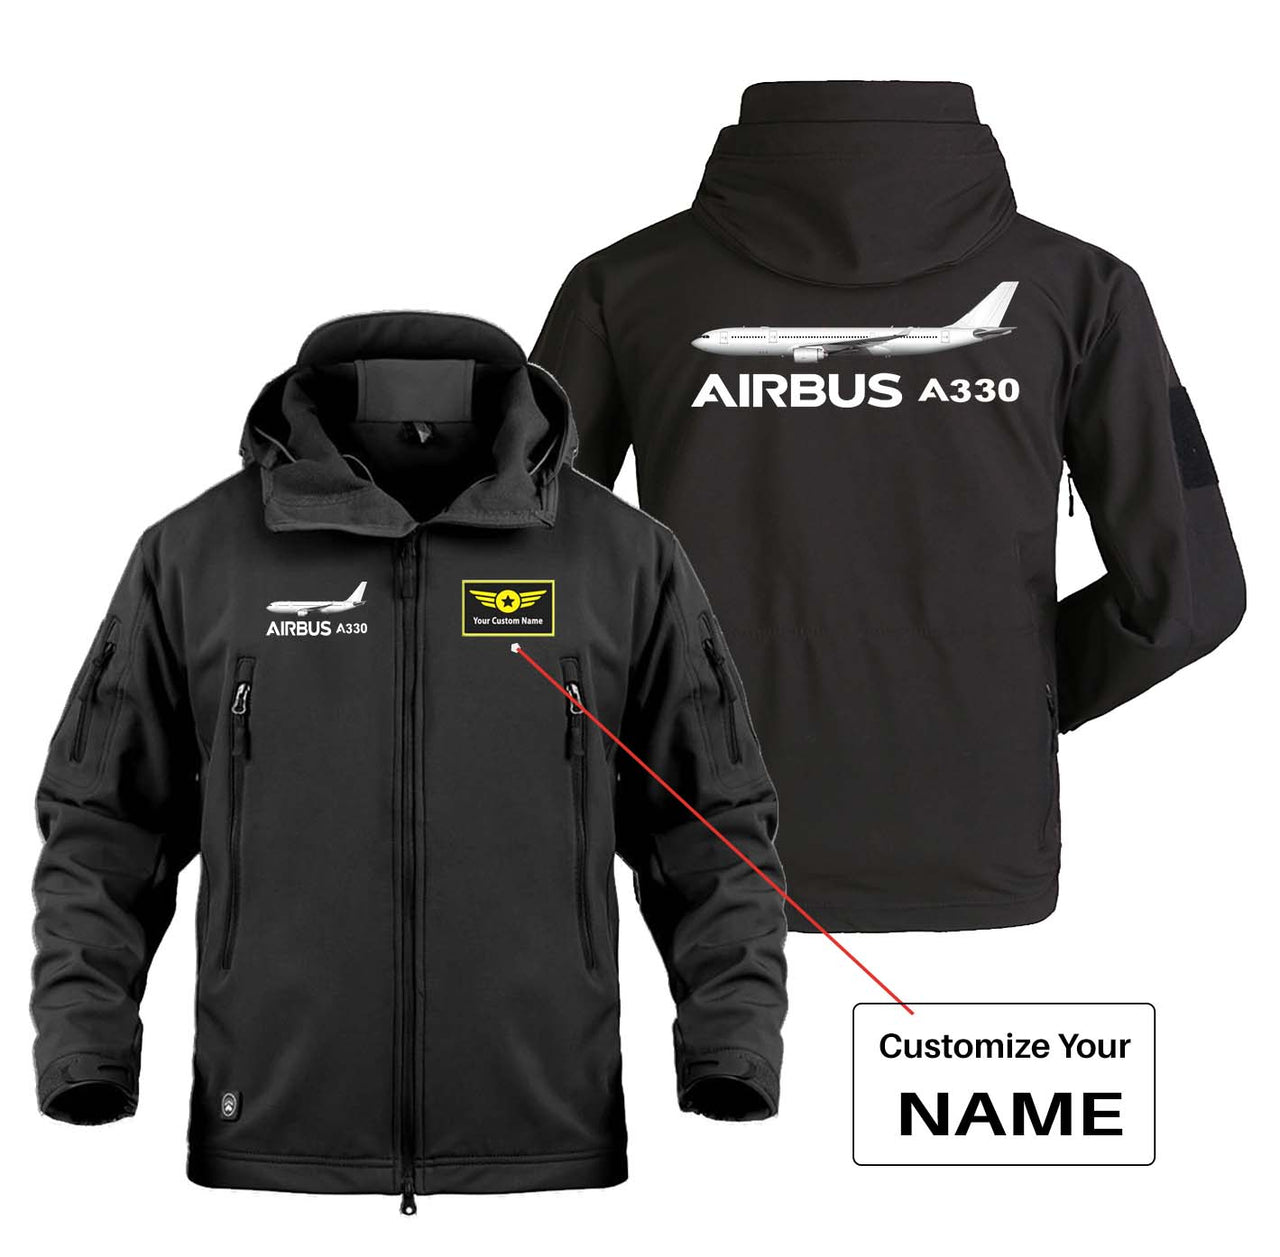 The Airbus A330 Designed Military Jackets (Customizable)